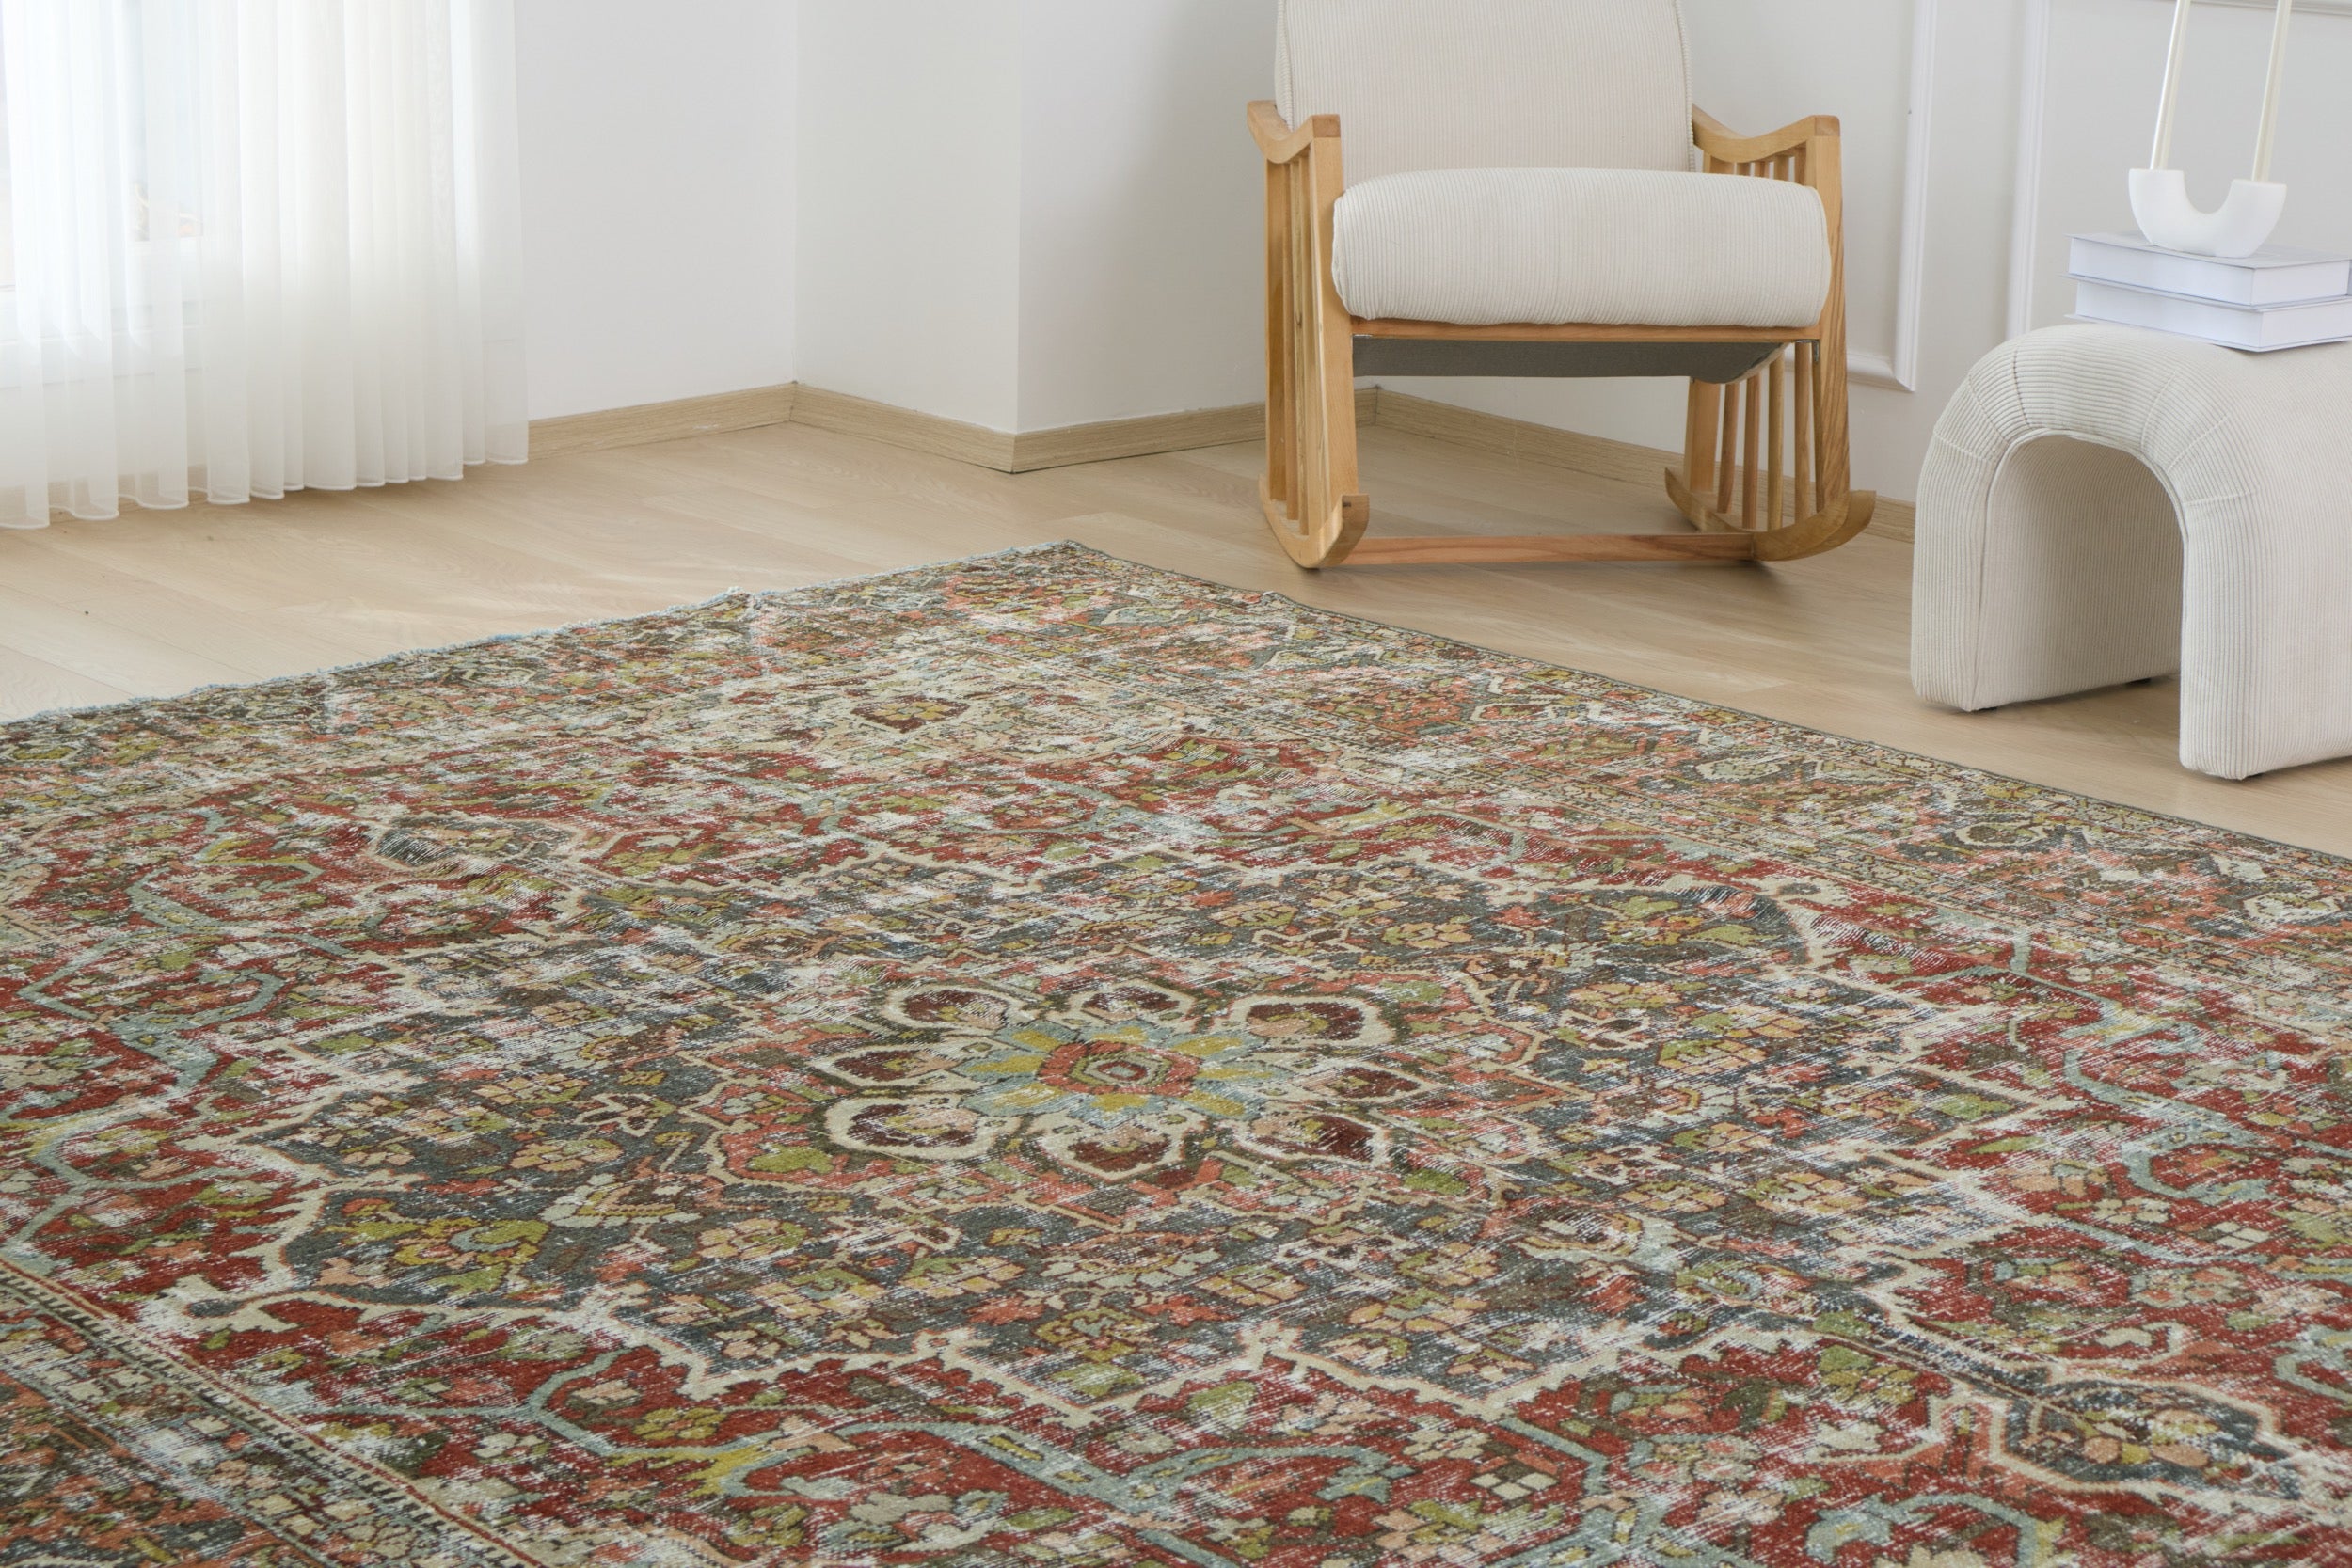 Revelation - Vintage Rug Carpet, Where Tradition Meets Contemporary Style | Kuden Rugs